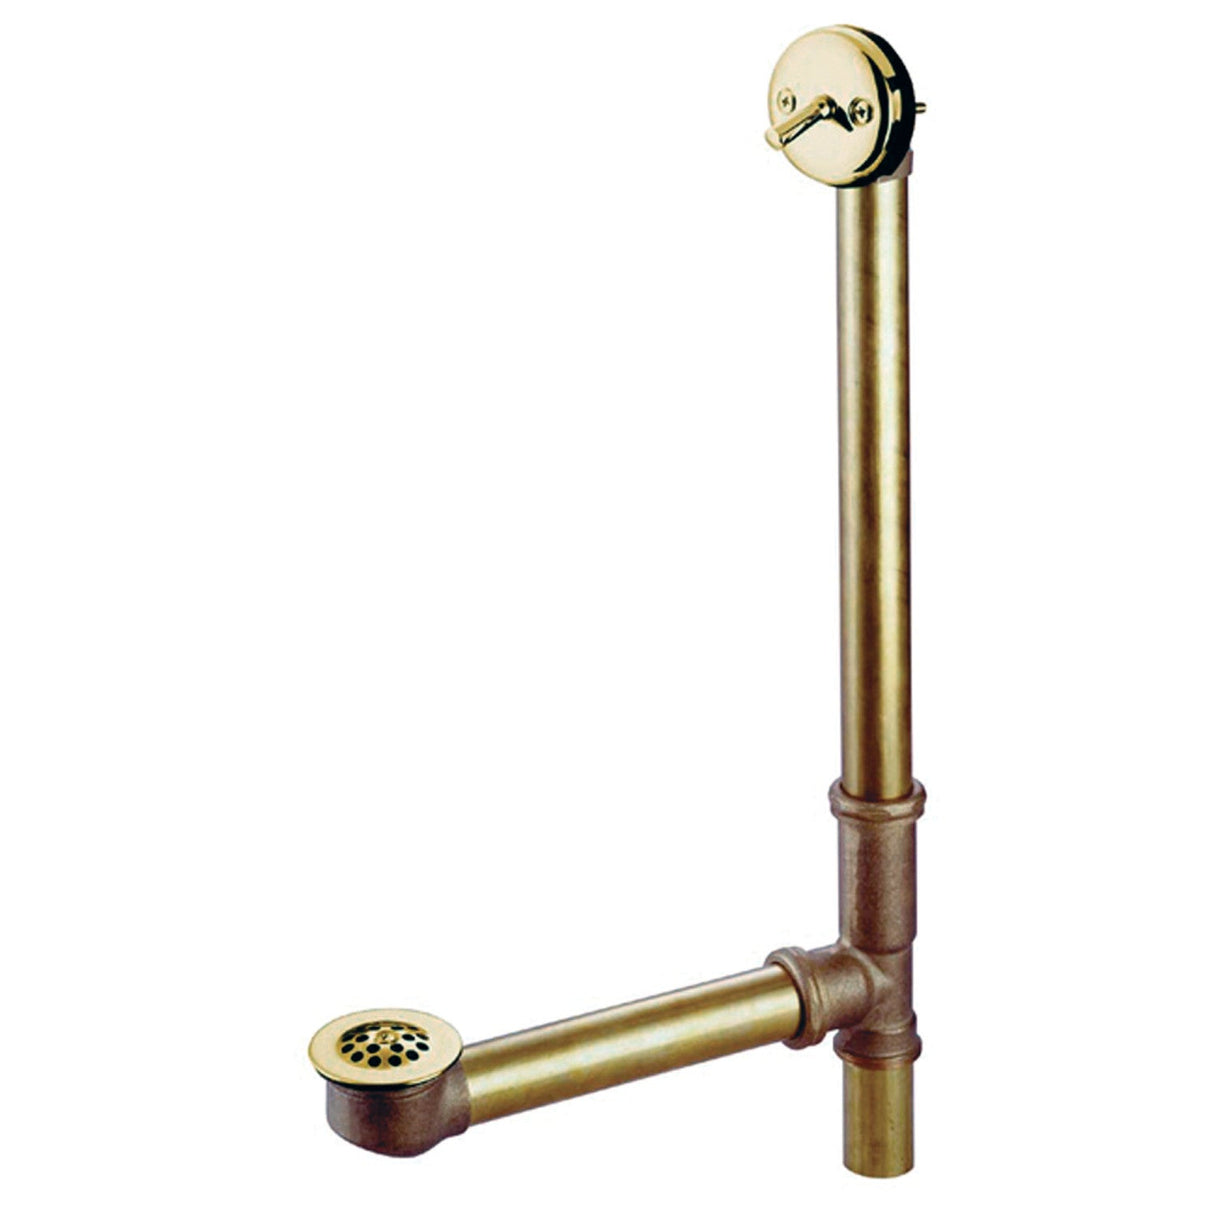 Made To Match DTL1182 23-Inch Brass Trip Lever Tub Waste and Overflow with Grid Strainer, Polished Brass